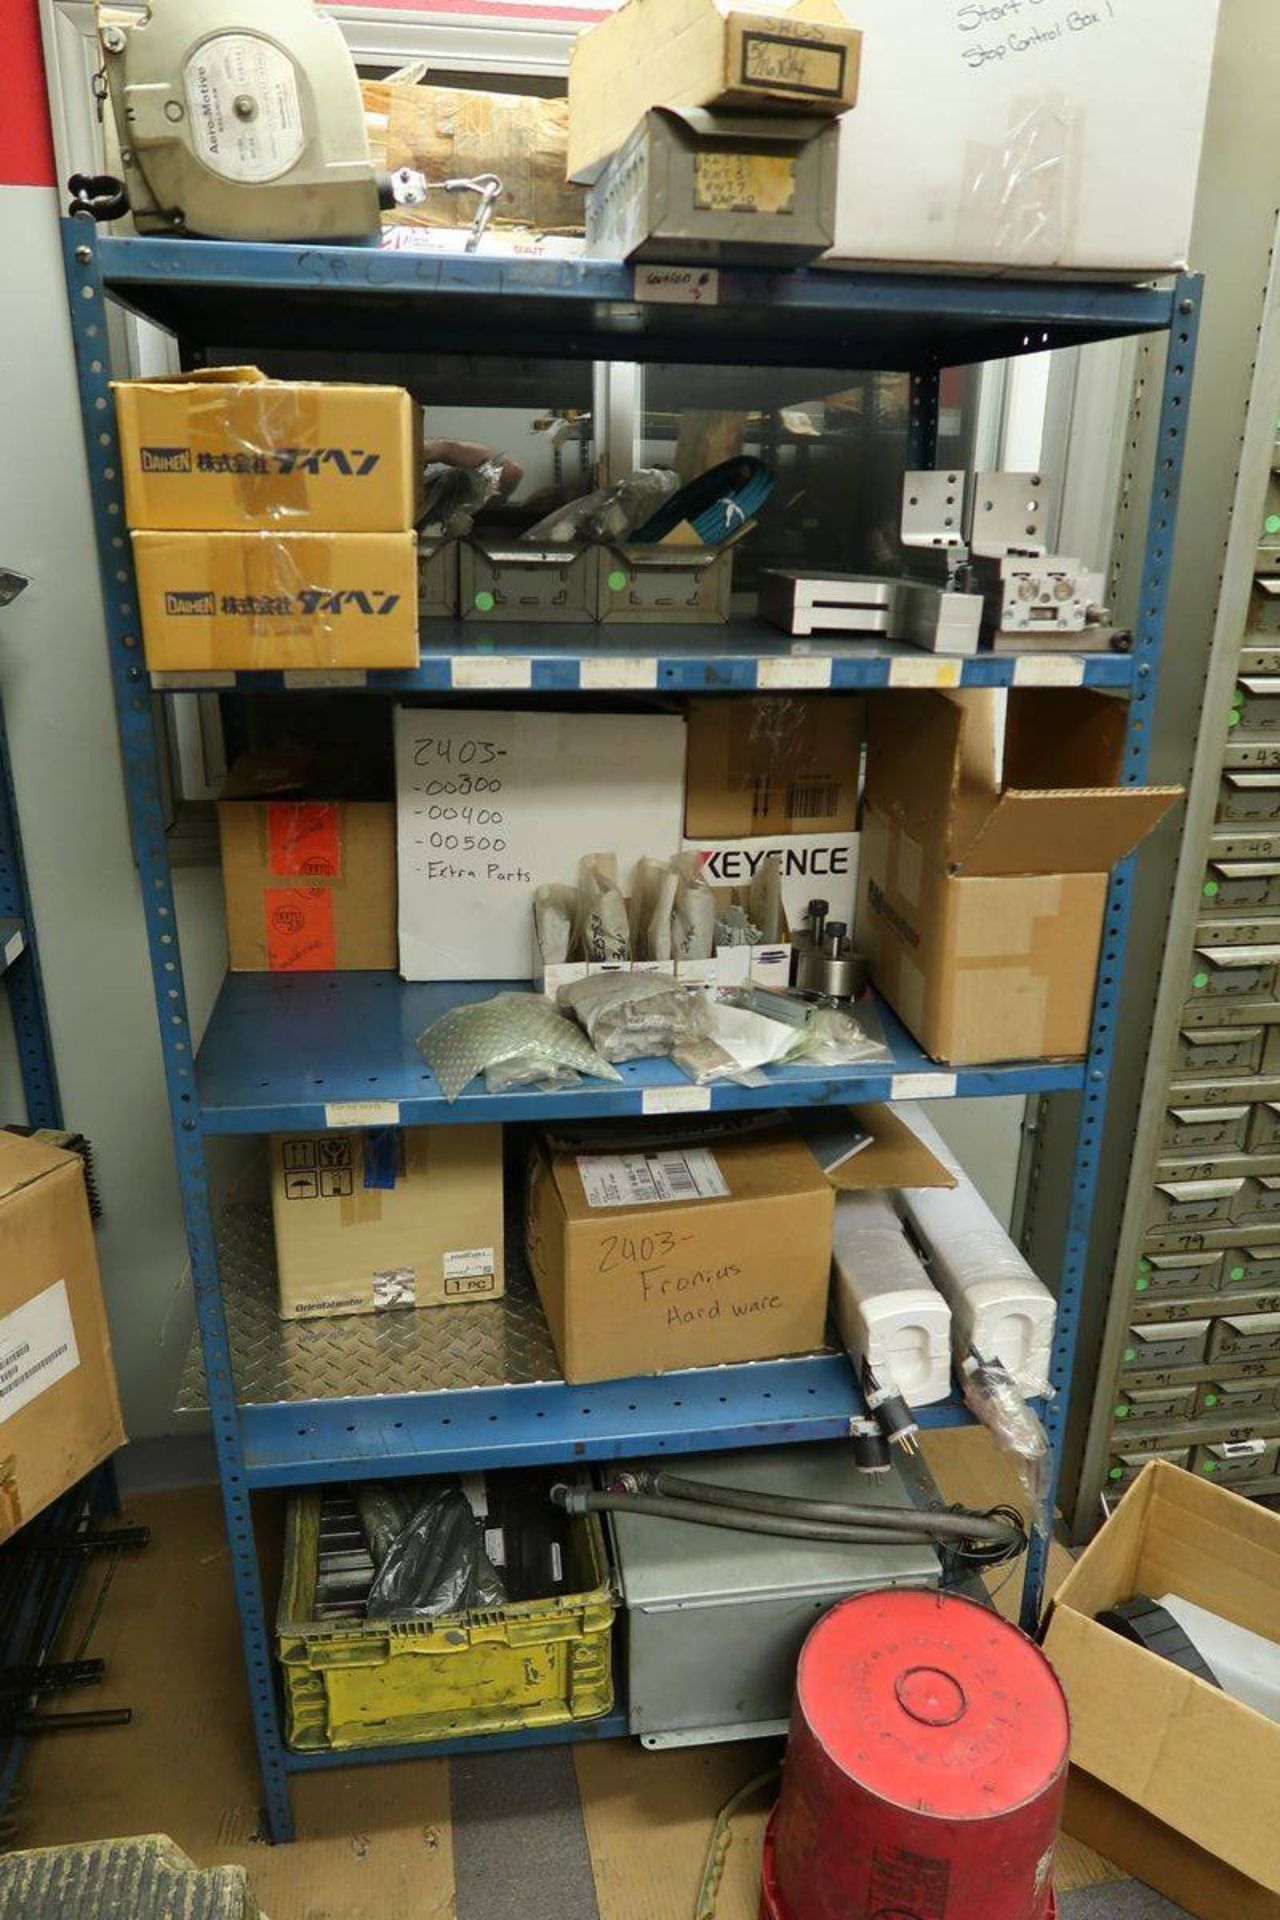 Contents of Maintenance Stock Area - Image 12 of 17